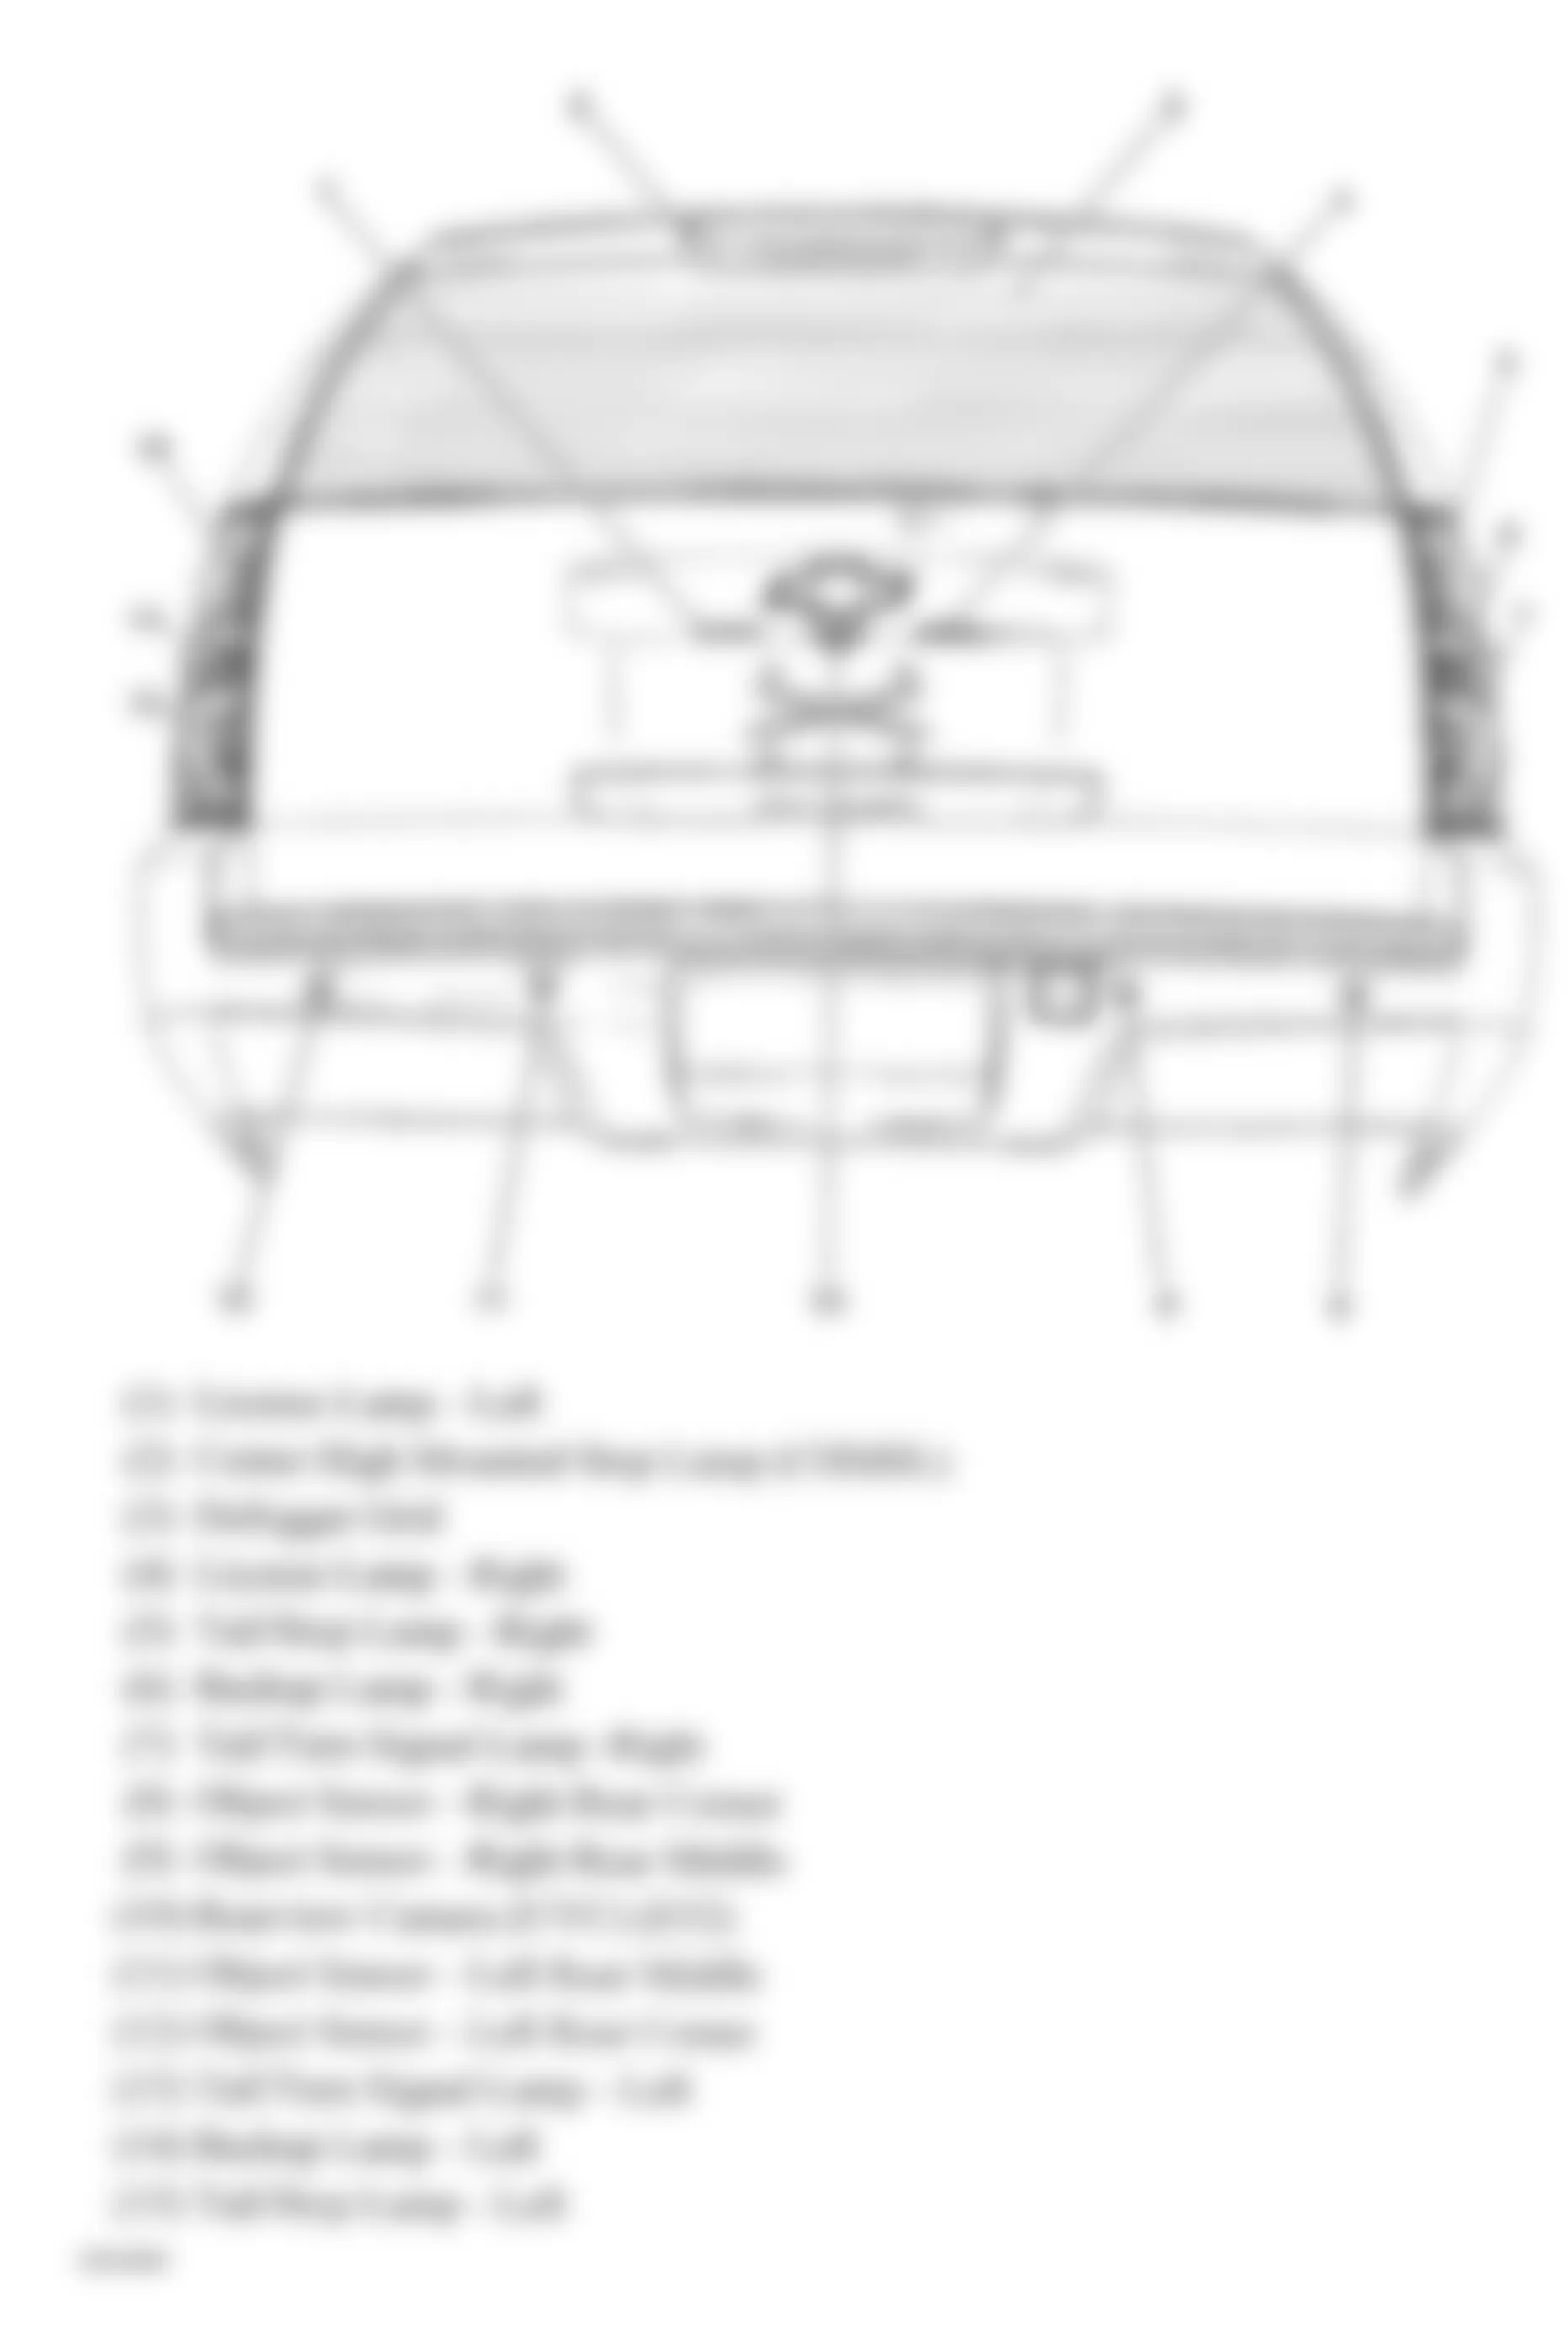 Chevrolet Suburban K1500 2010 - Component Locations -  Rear Of Vehicle (Avalanche, Suburban & Tahoe W/One Piece Liftgate)